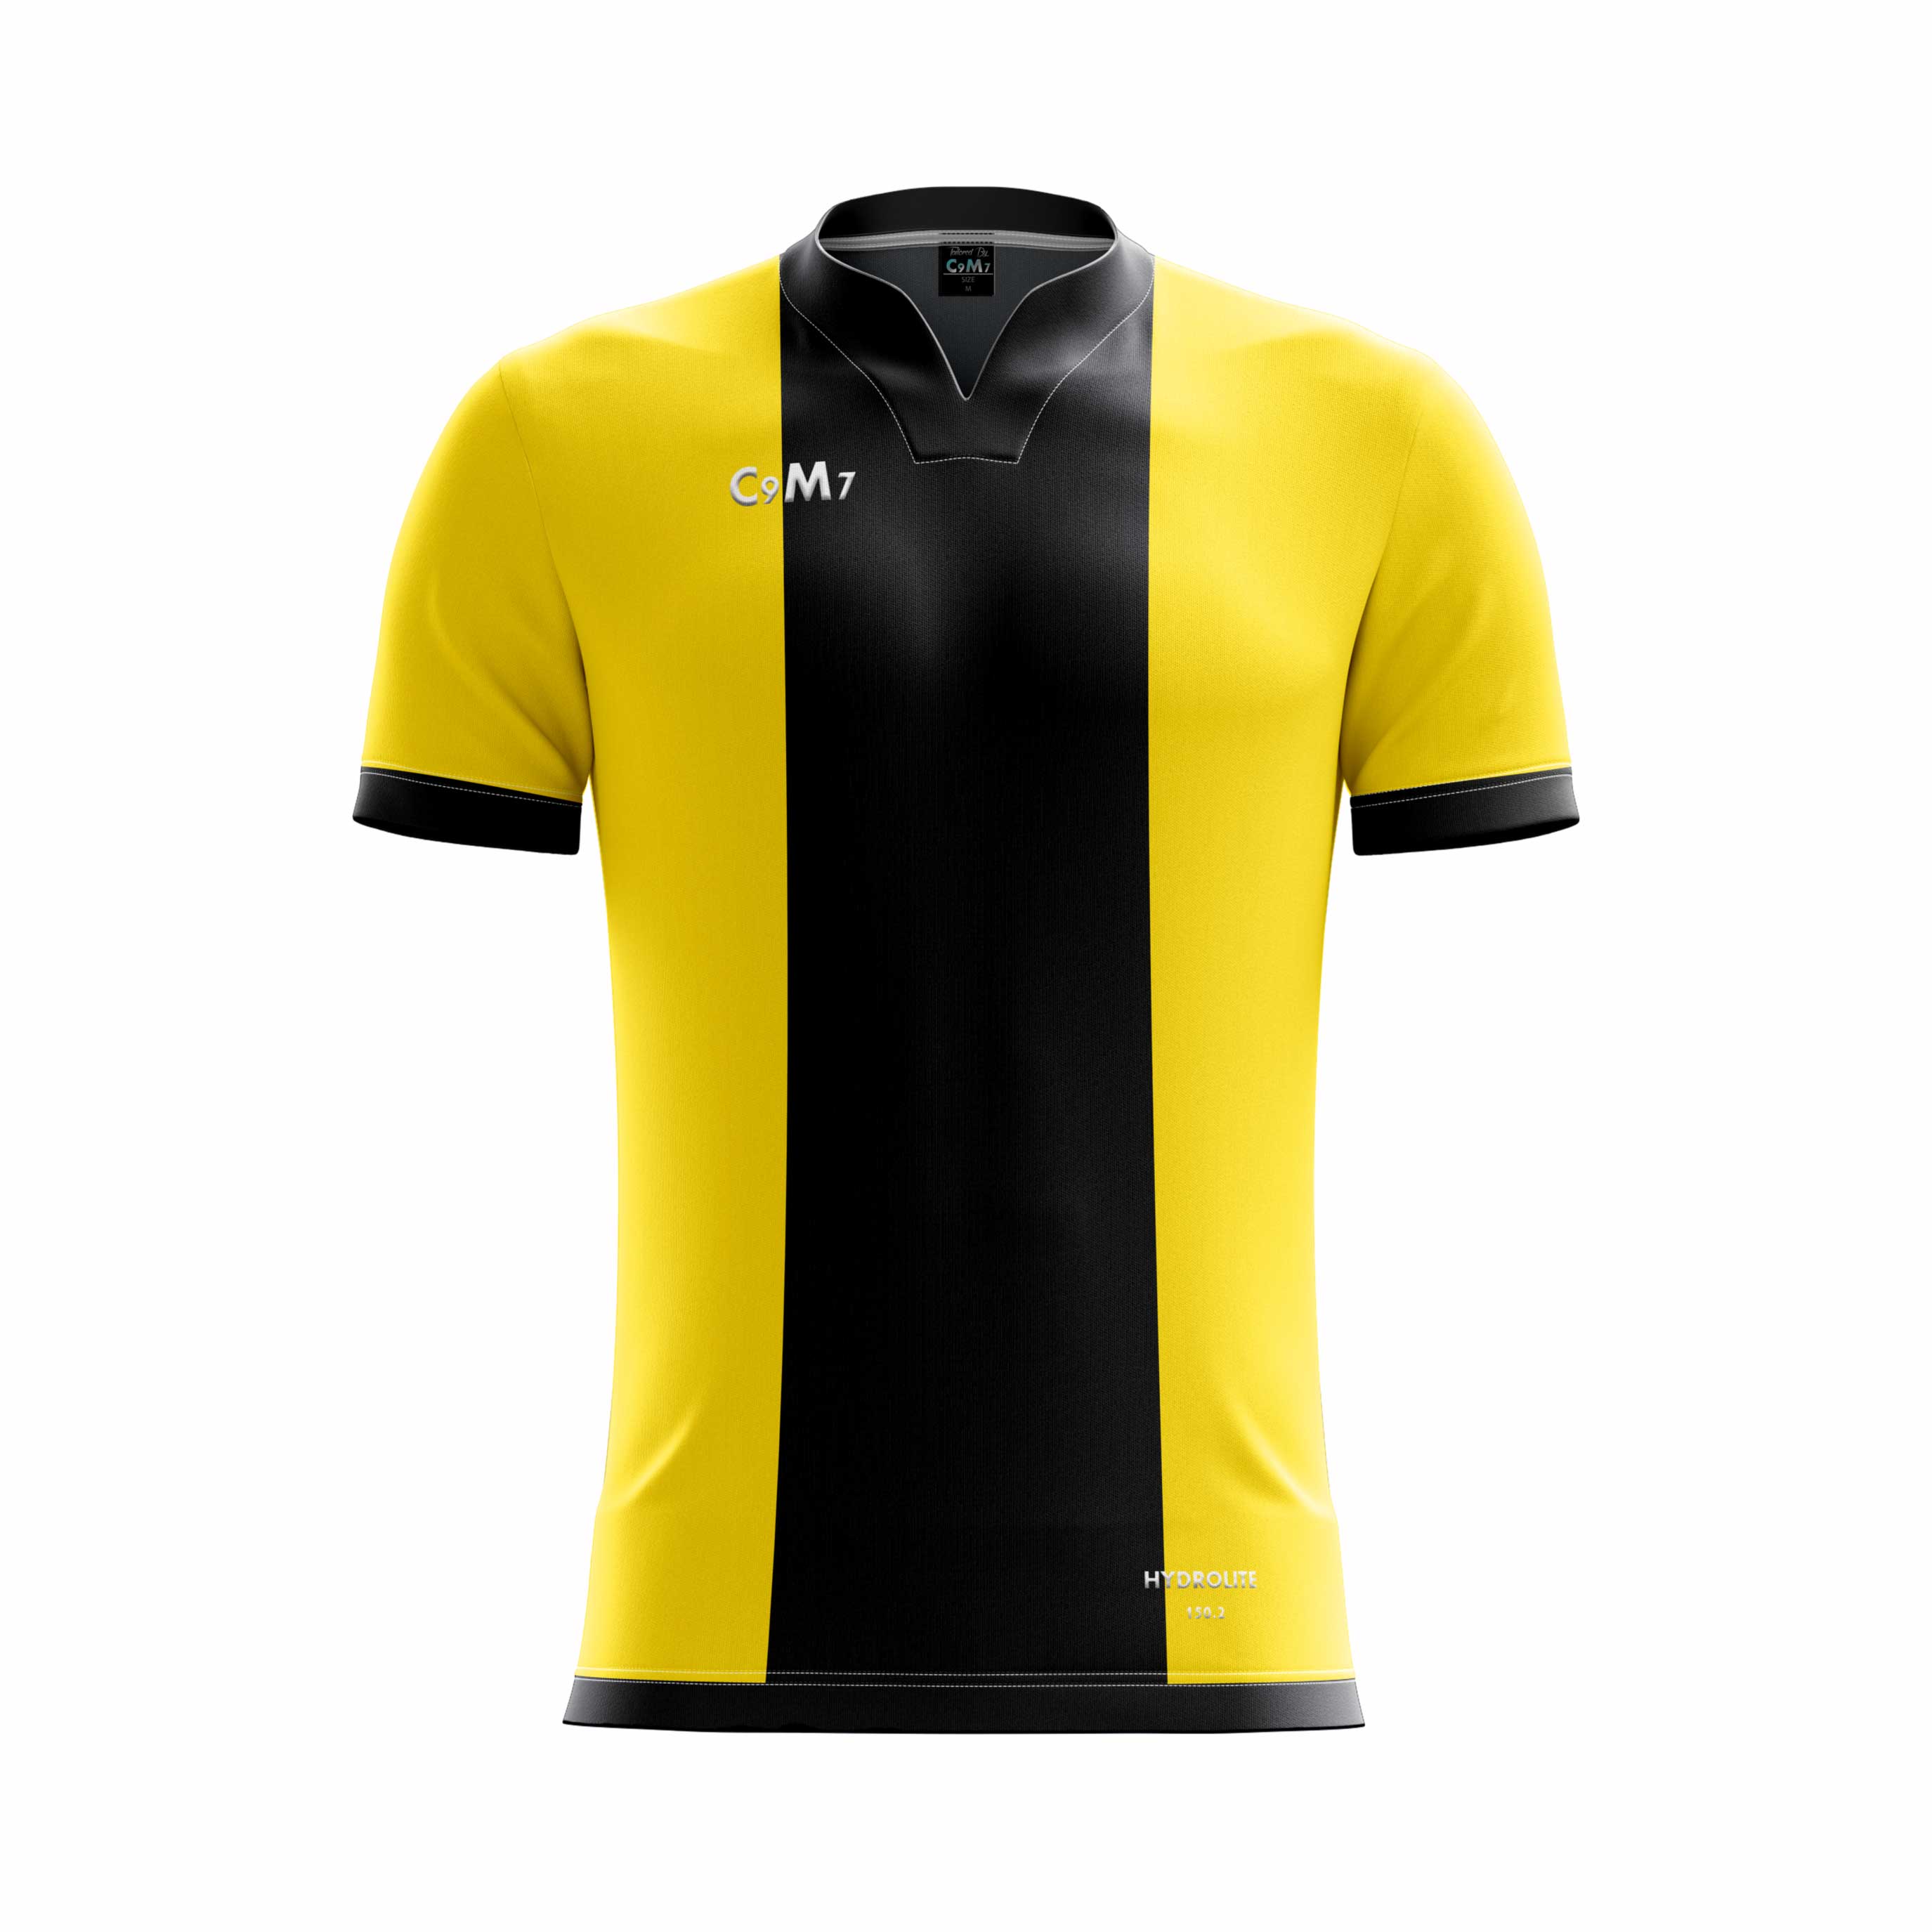 football jersey yellow and black